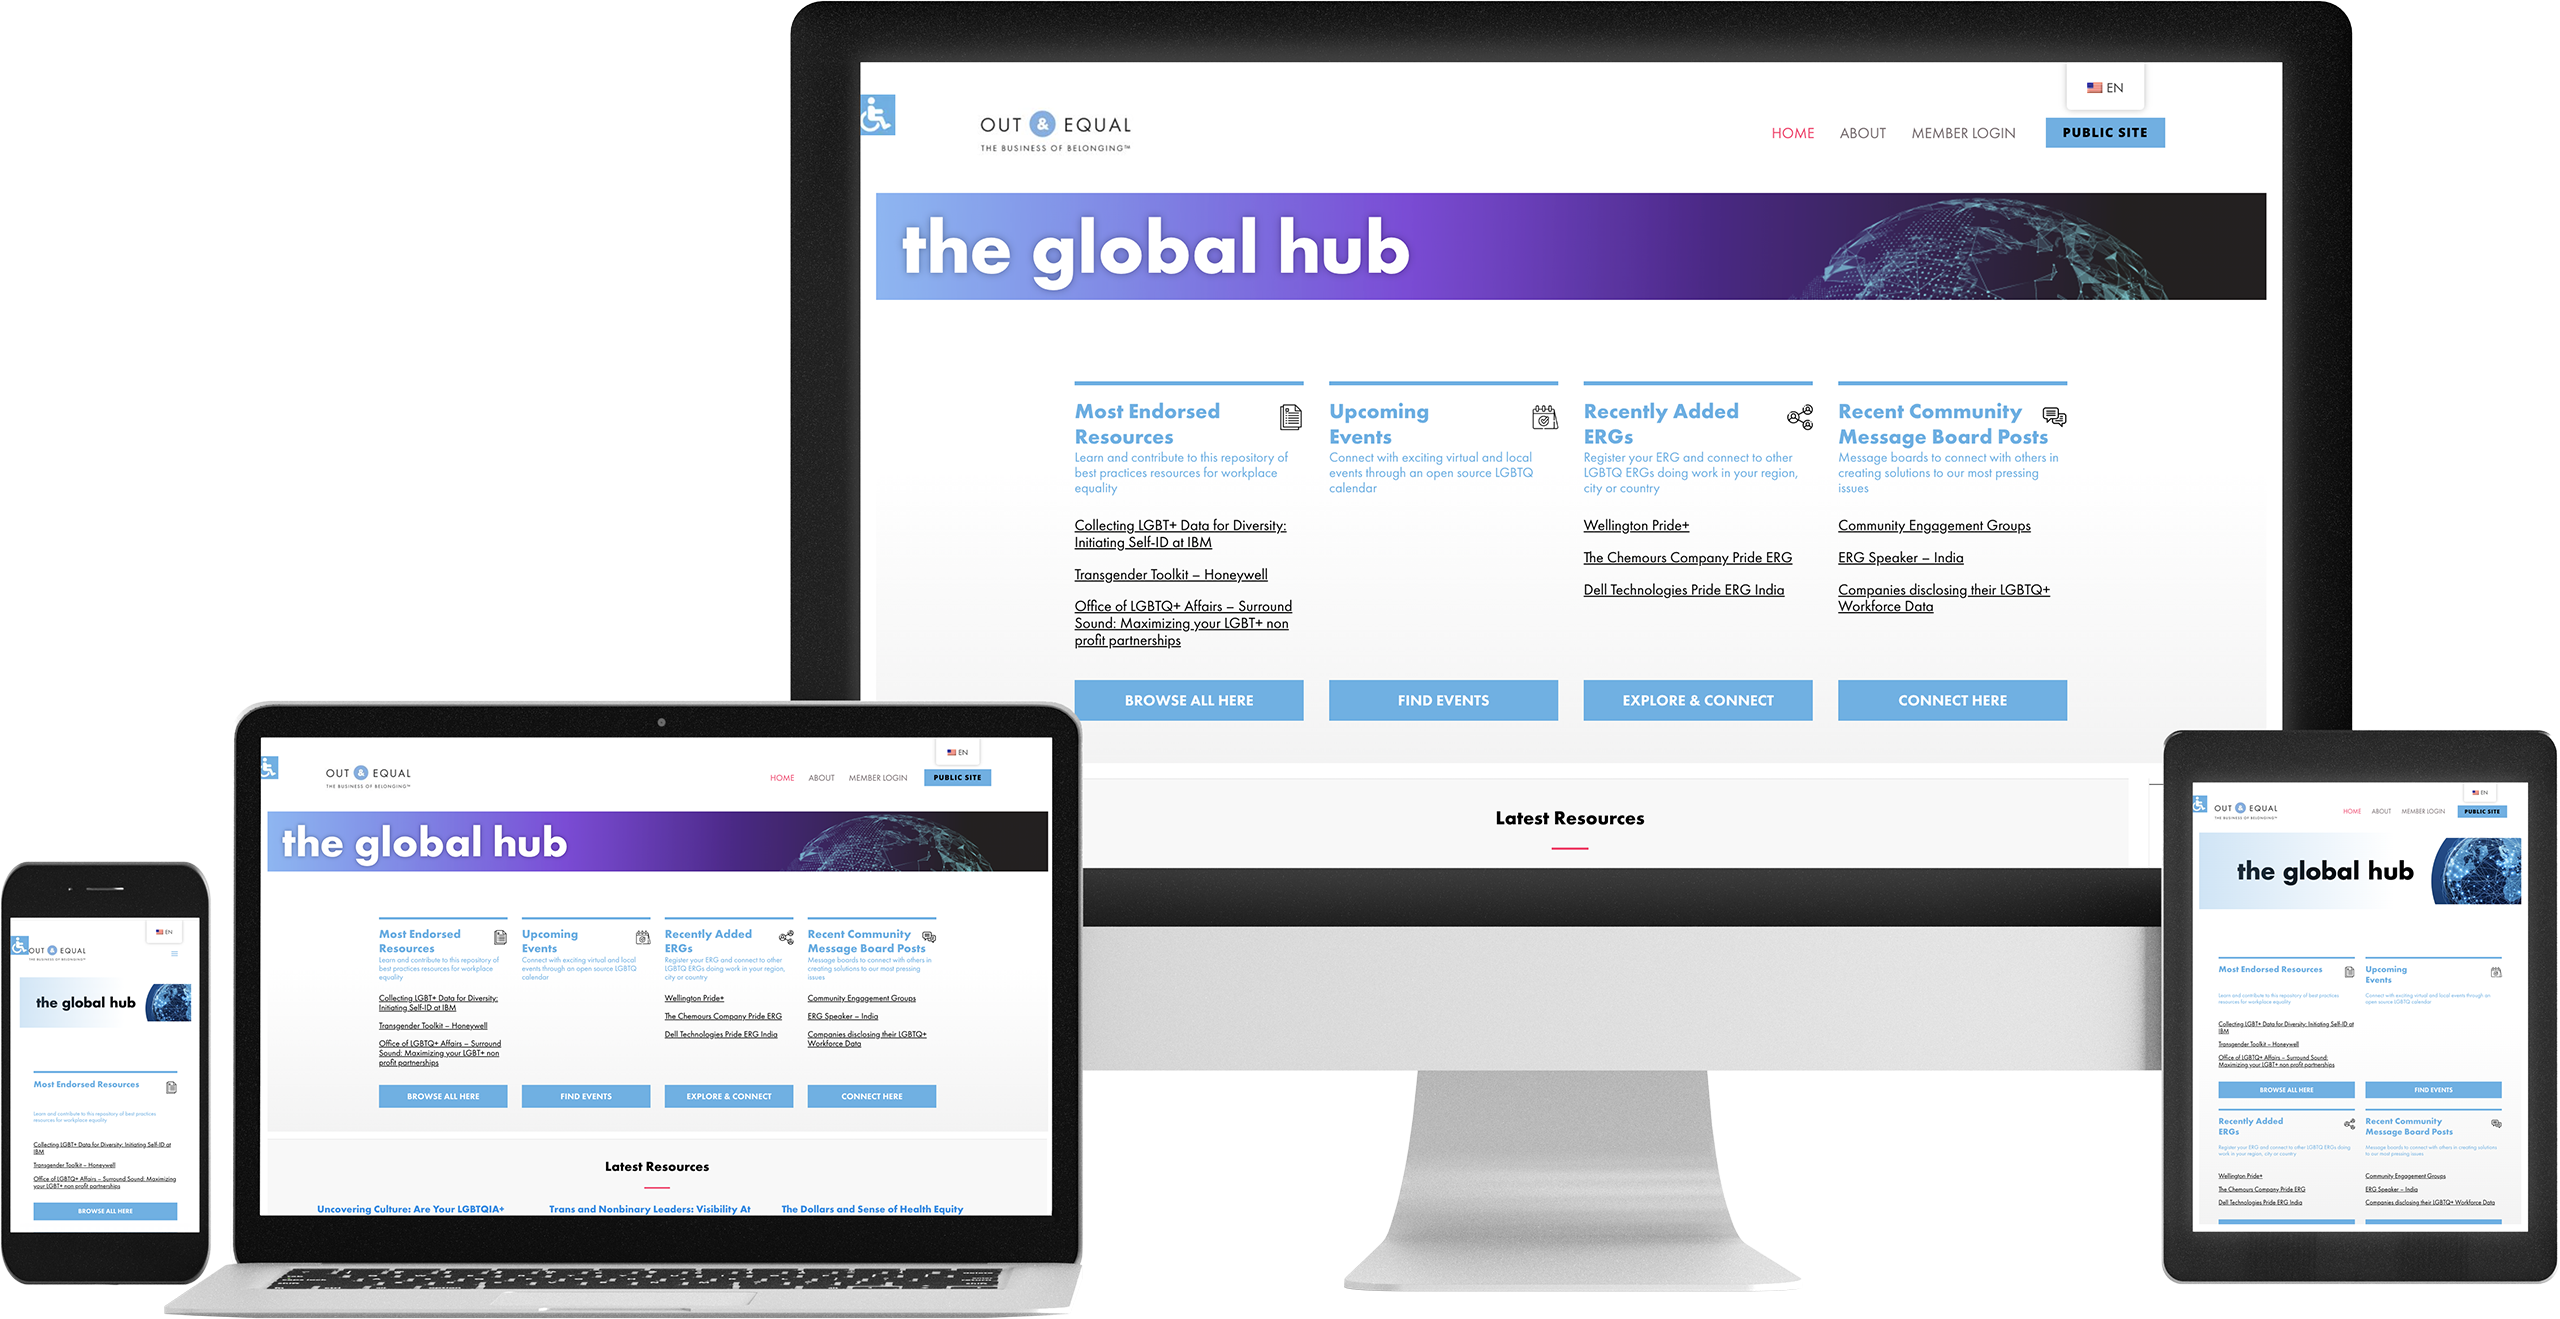 Out & Equal Global Hub on devices